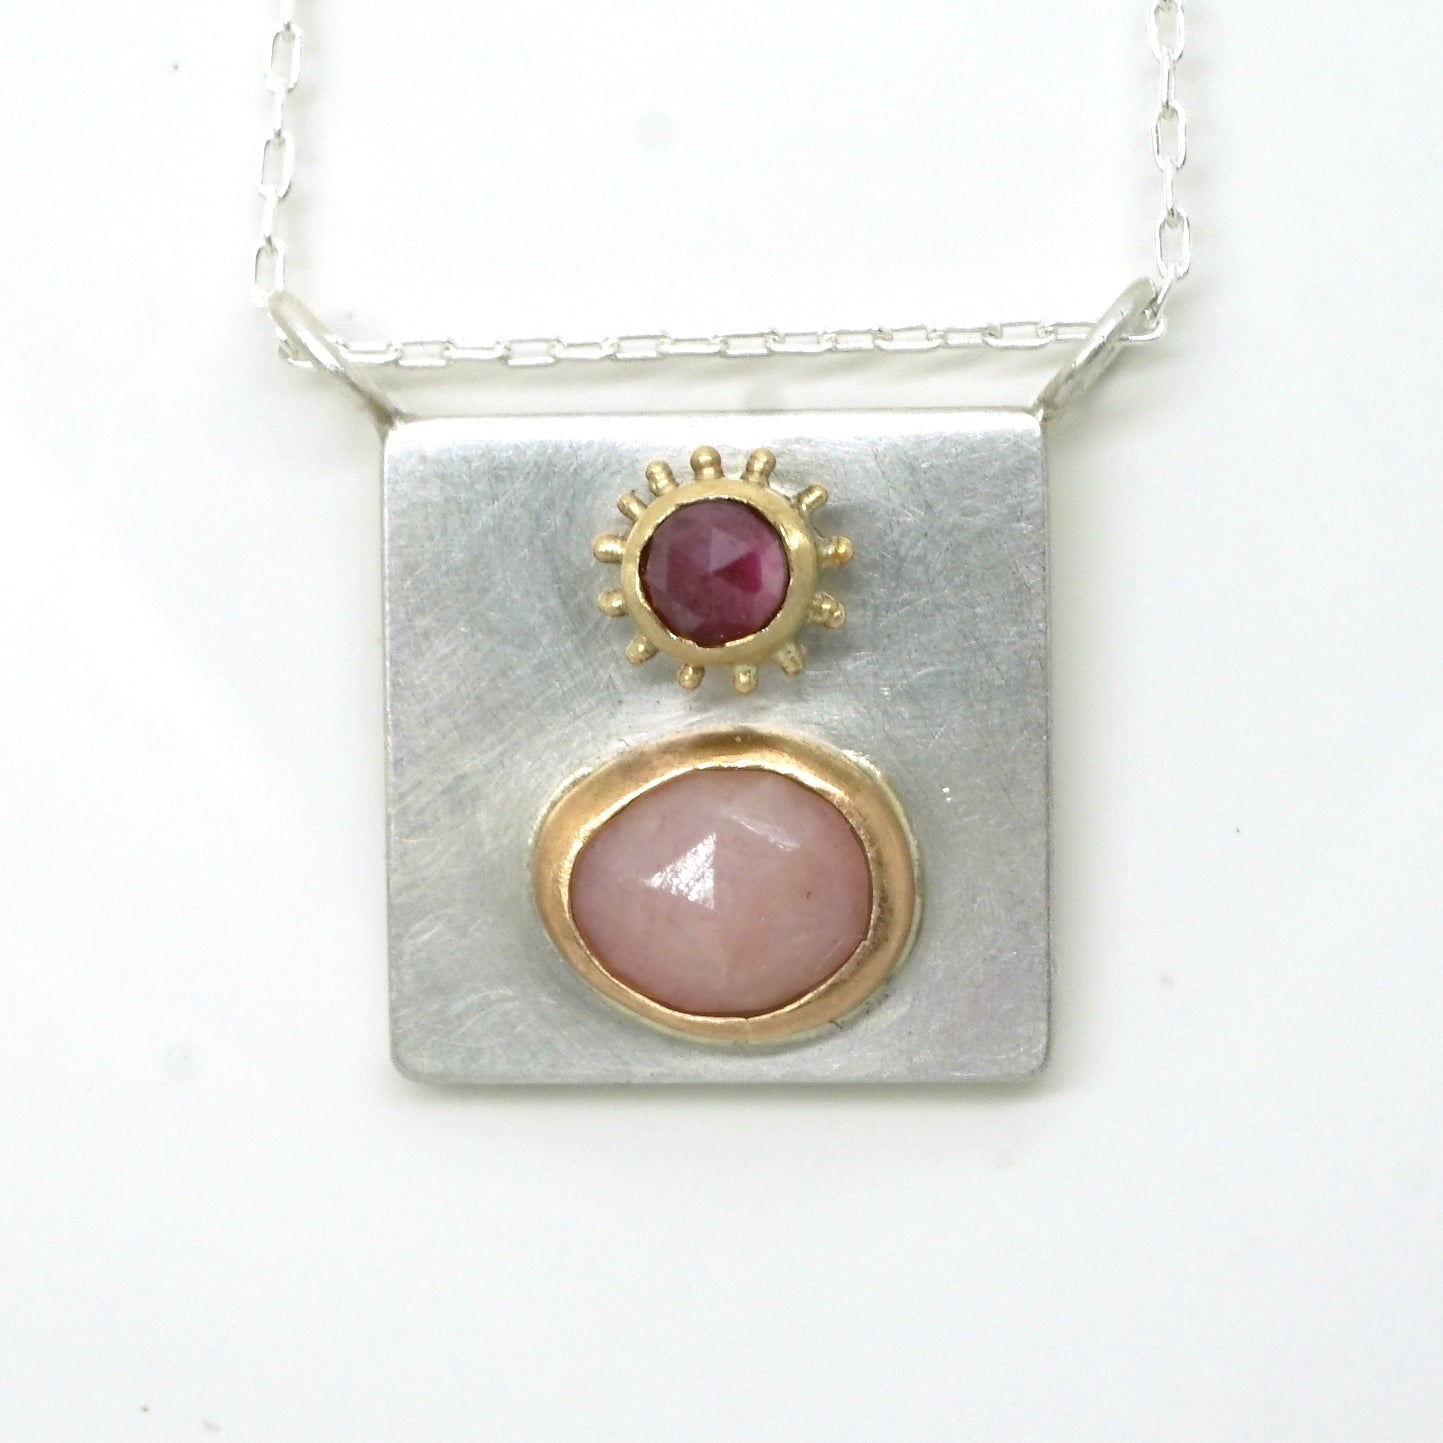 Art pendant necklace with ruby and sapphire